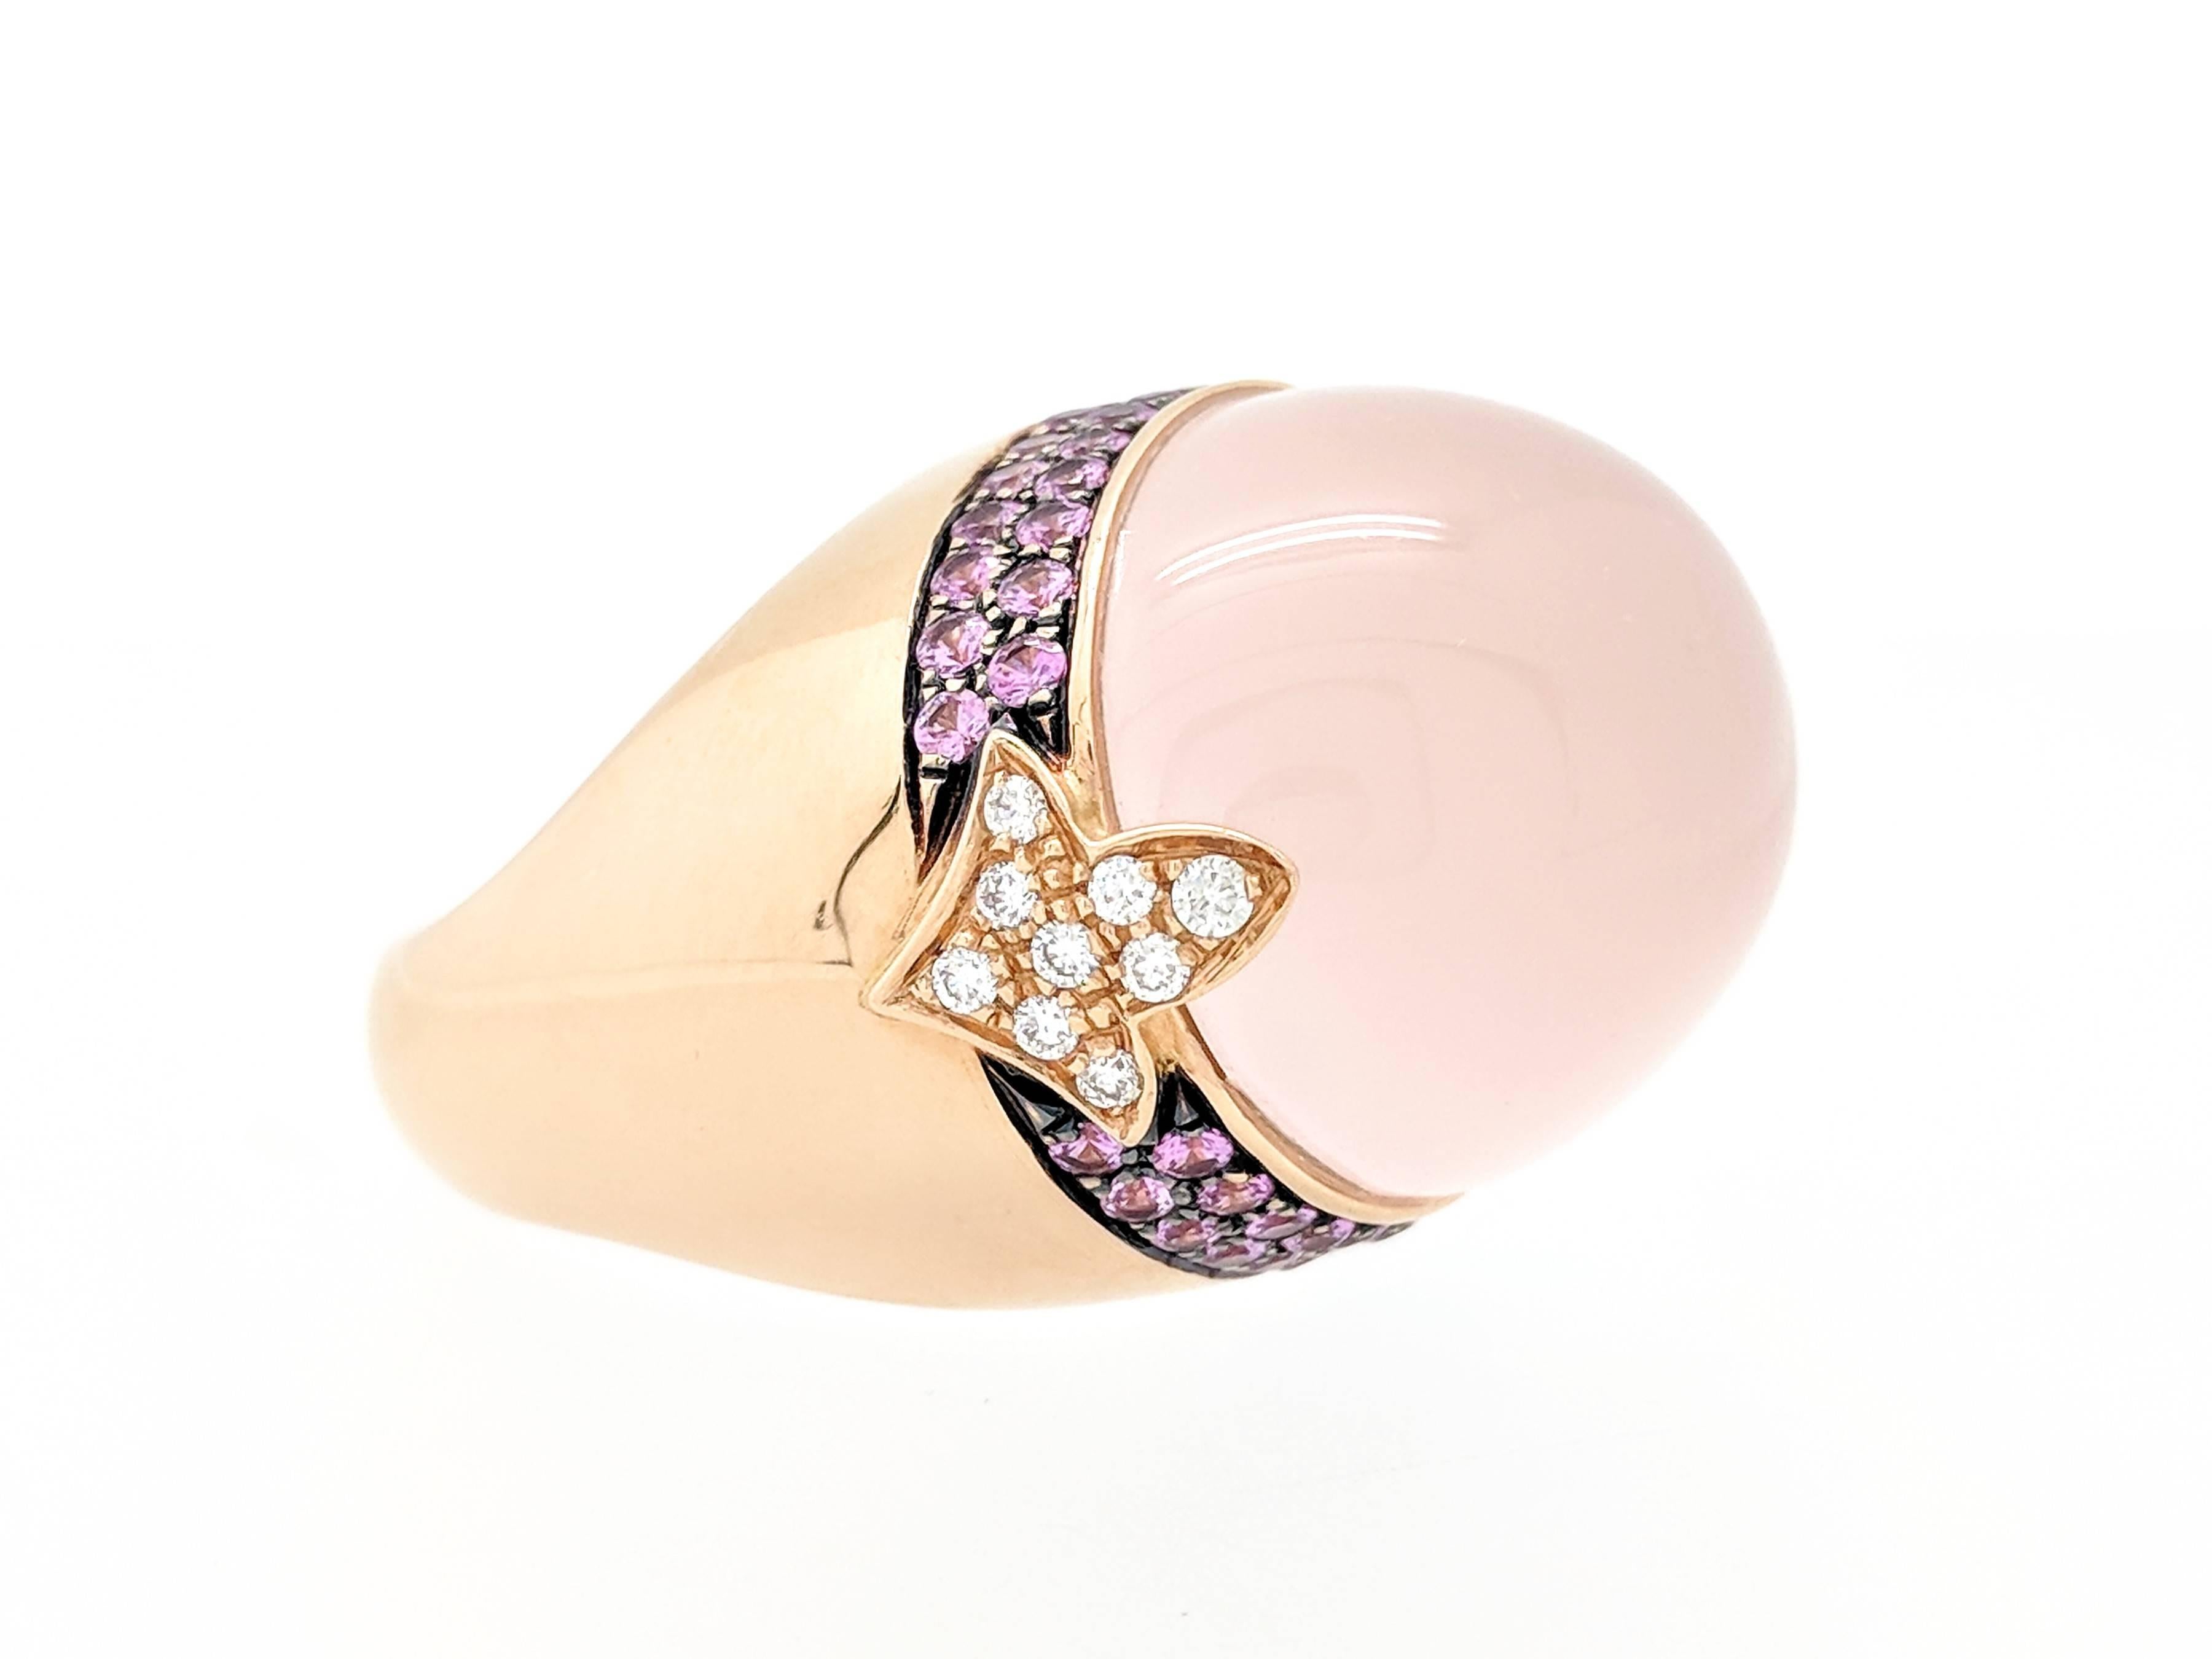 Nouvelle Bague 18 Karat Gold Cabochon Coral Pink Sapphires and Diamond Dome Ring 5